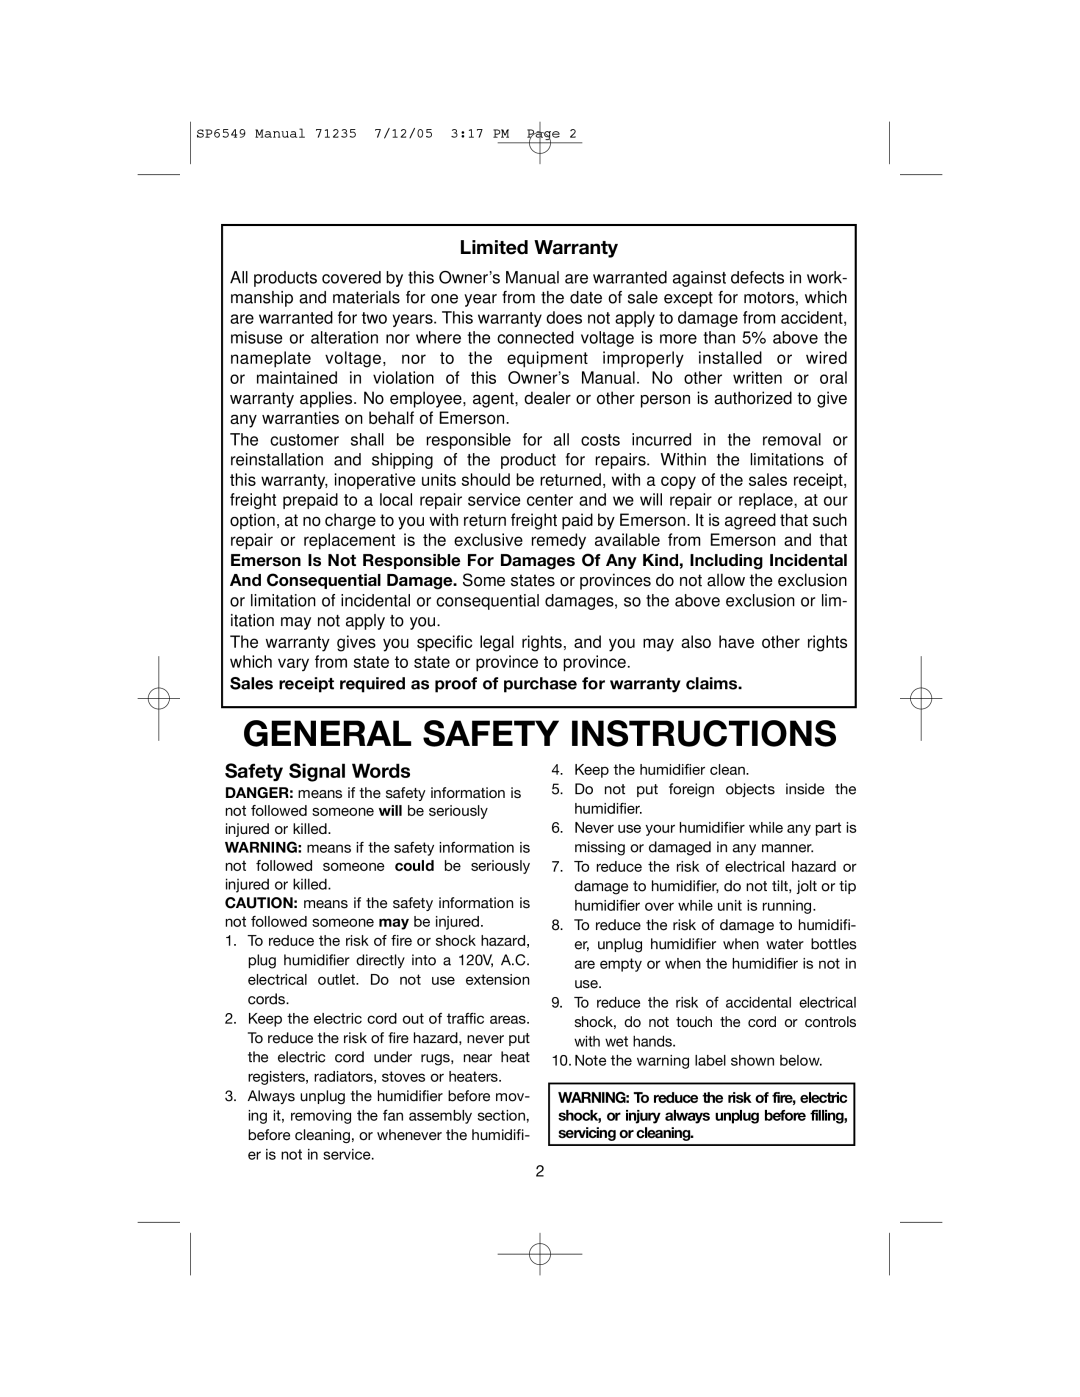 MoistAir MA 0950 owner manual General Safety Instructions, Limited Warranty, Safety Signal Words 